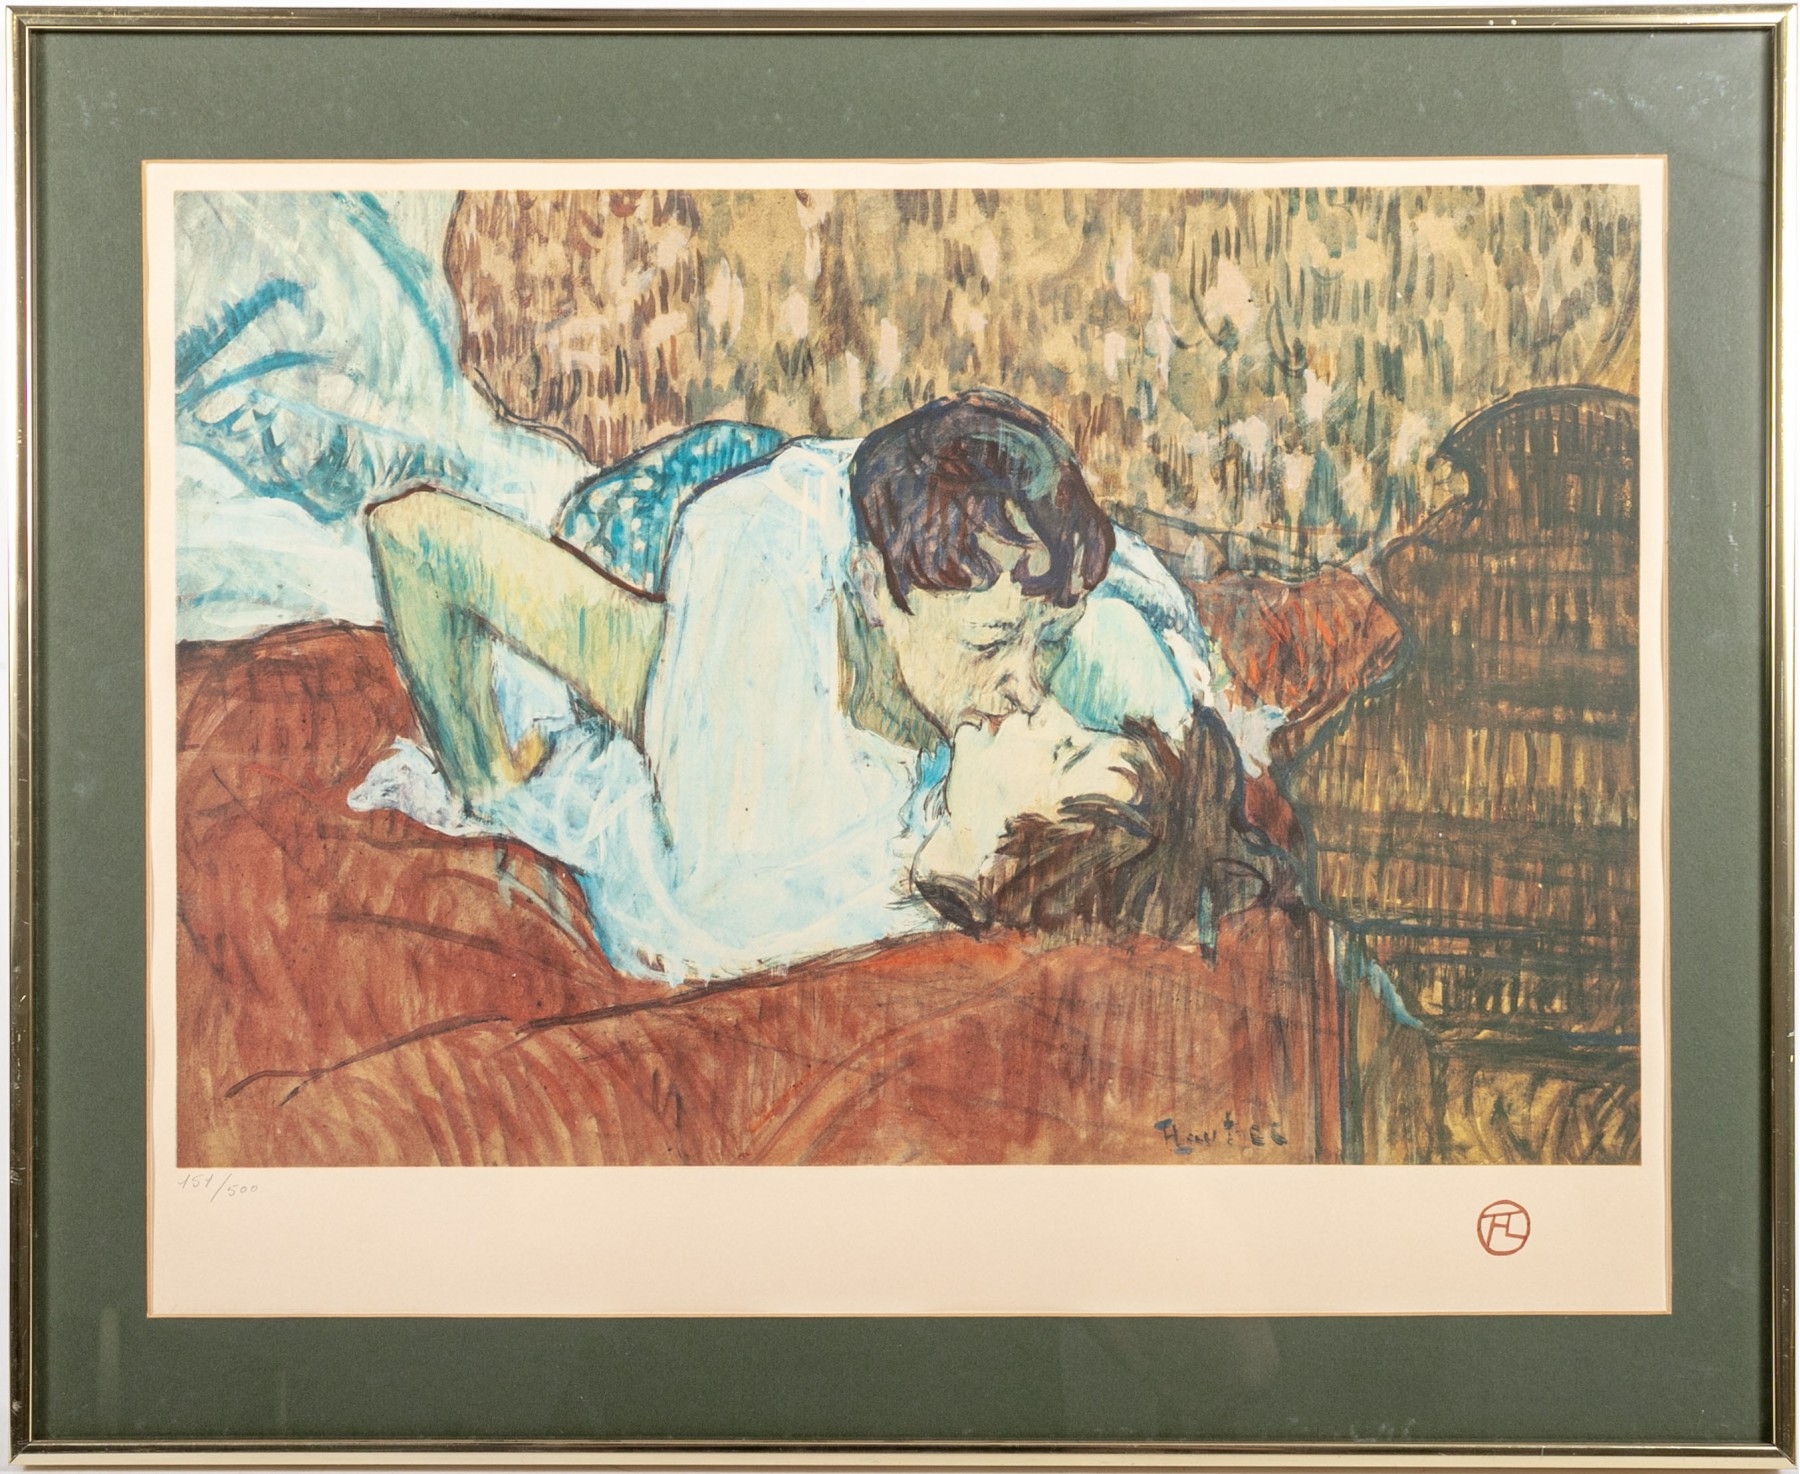 Artwork by Henri de Toulouse-Lautrec, In Bed The Kiss, Made of lithograph